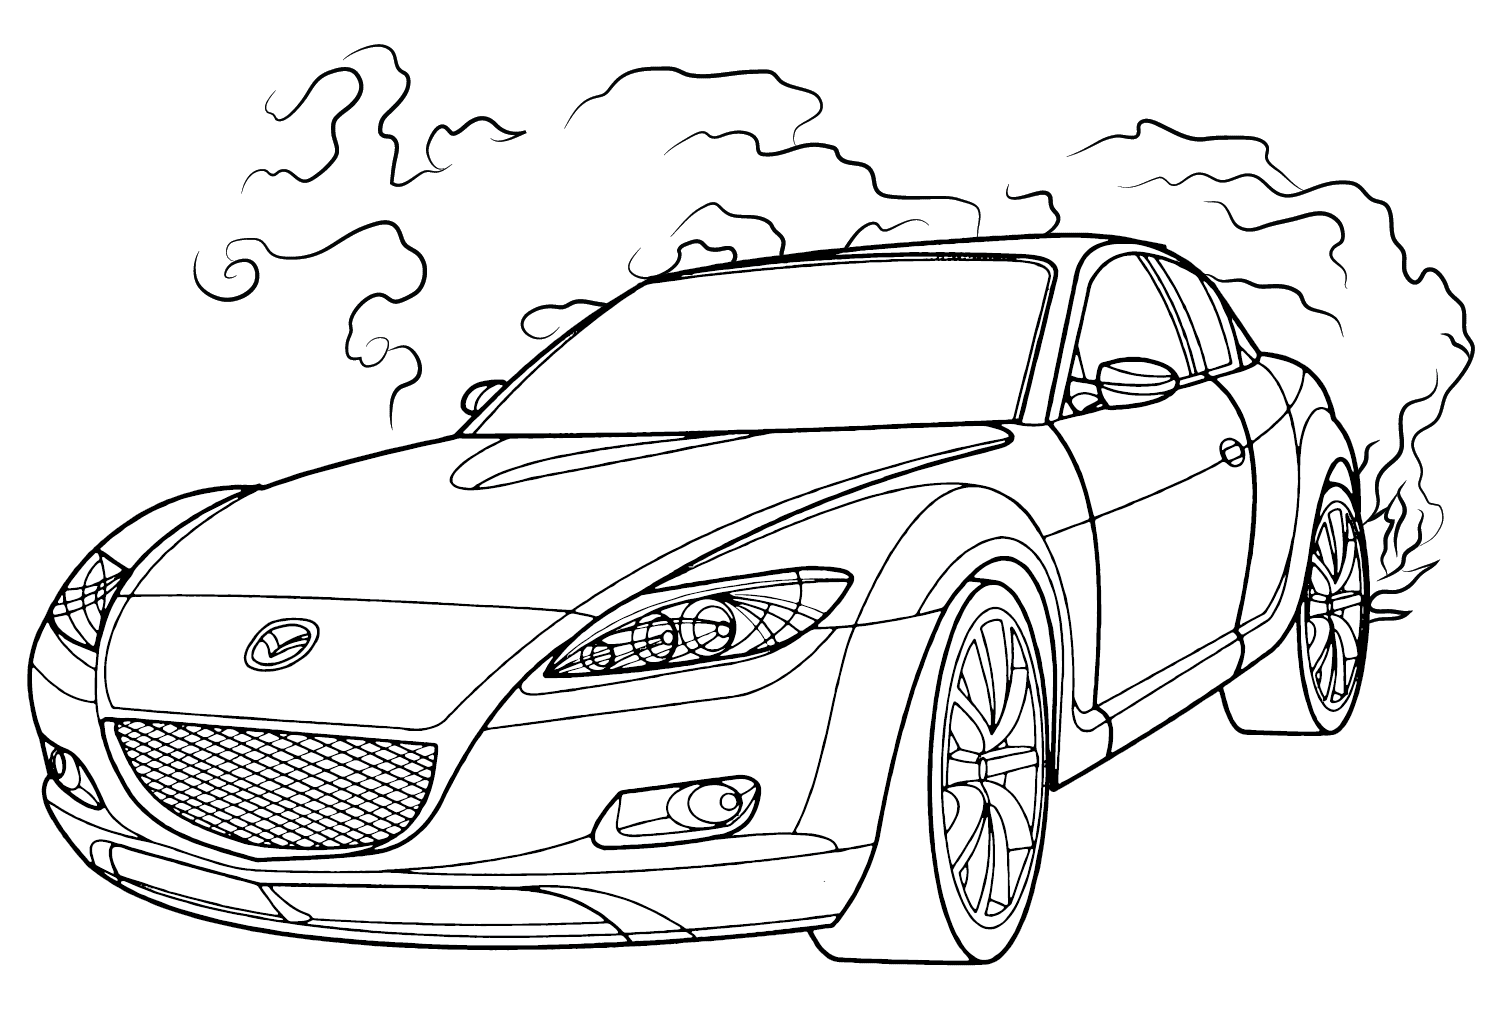 Mazda RX-8 Coloring Page Free from Mazda